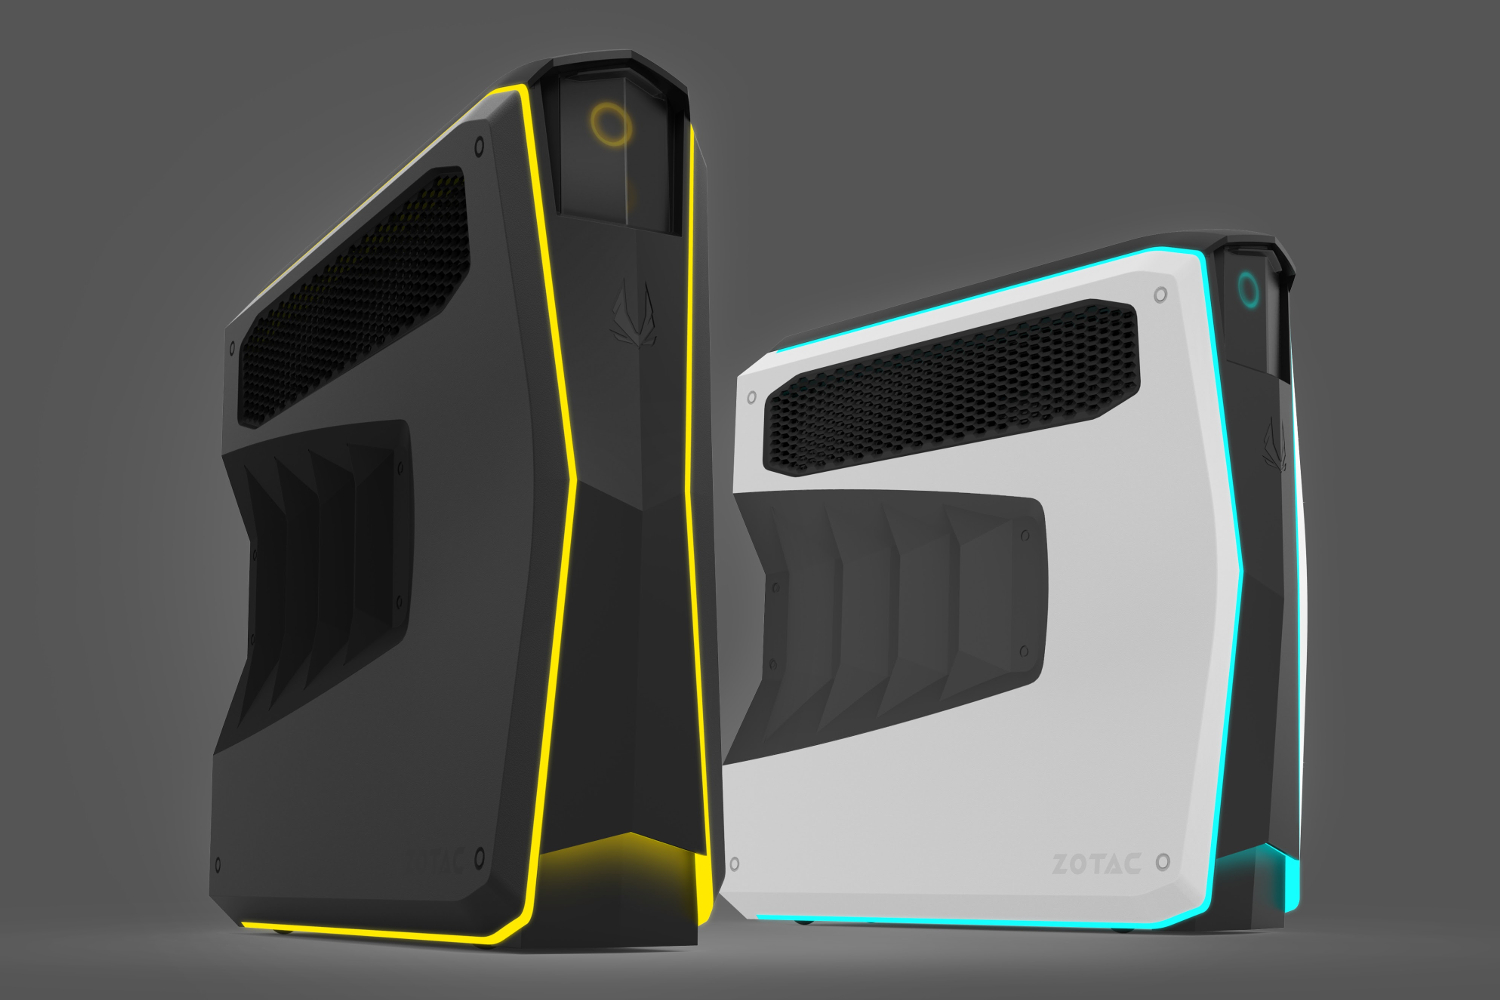 Zotac Has A Huge Lineup Of Products Heading To Computex Including A GeForce GTX Ti Mini Card | Digital Trends